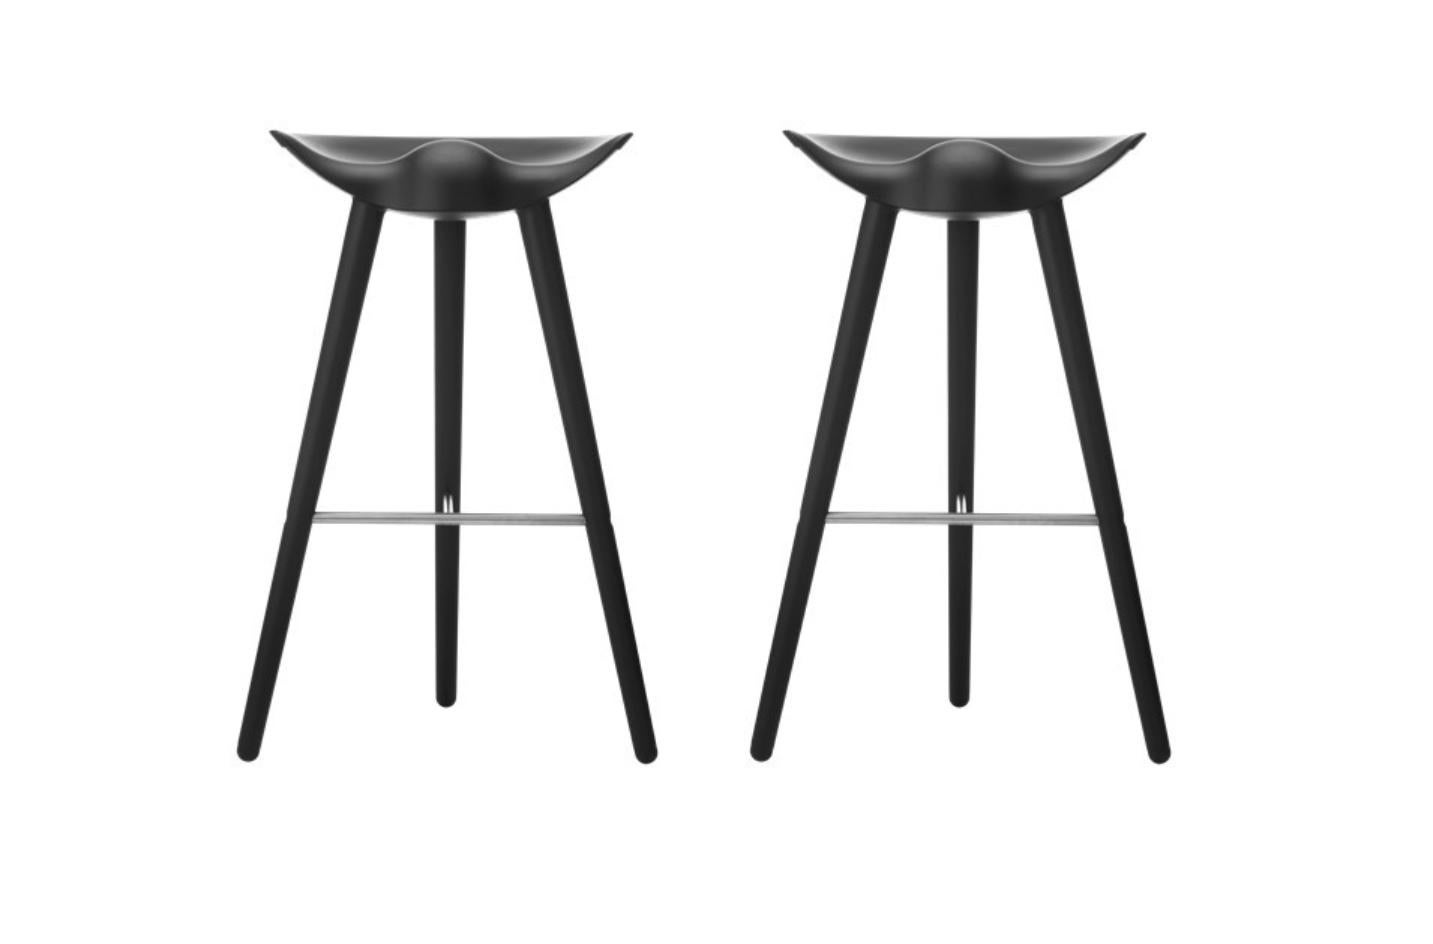 Set of 2 ML 42 black beech and stainless steel bar stools by Lassen
Dimensions: H 77 x W 36 x L 55.5 cm
Materials: beech, stainless steel

In 1942 Mogens Lassen designed the Stool ML42 as a piece for a furniture exhibition held at the Danish Museum